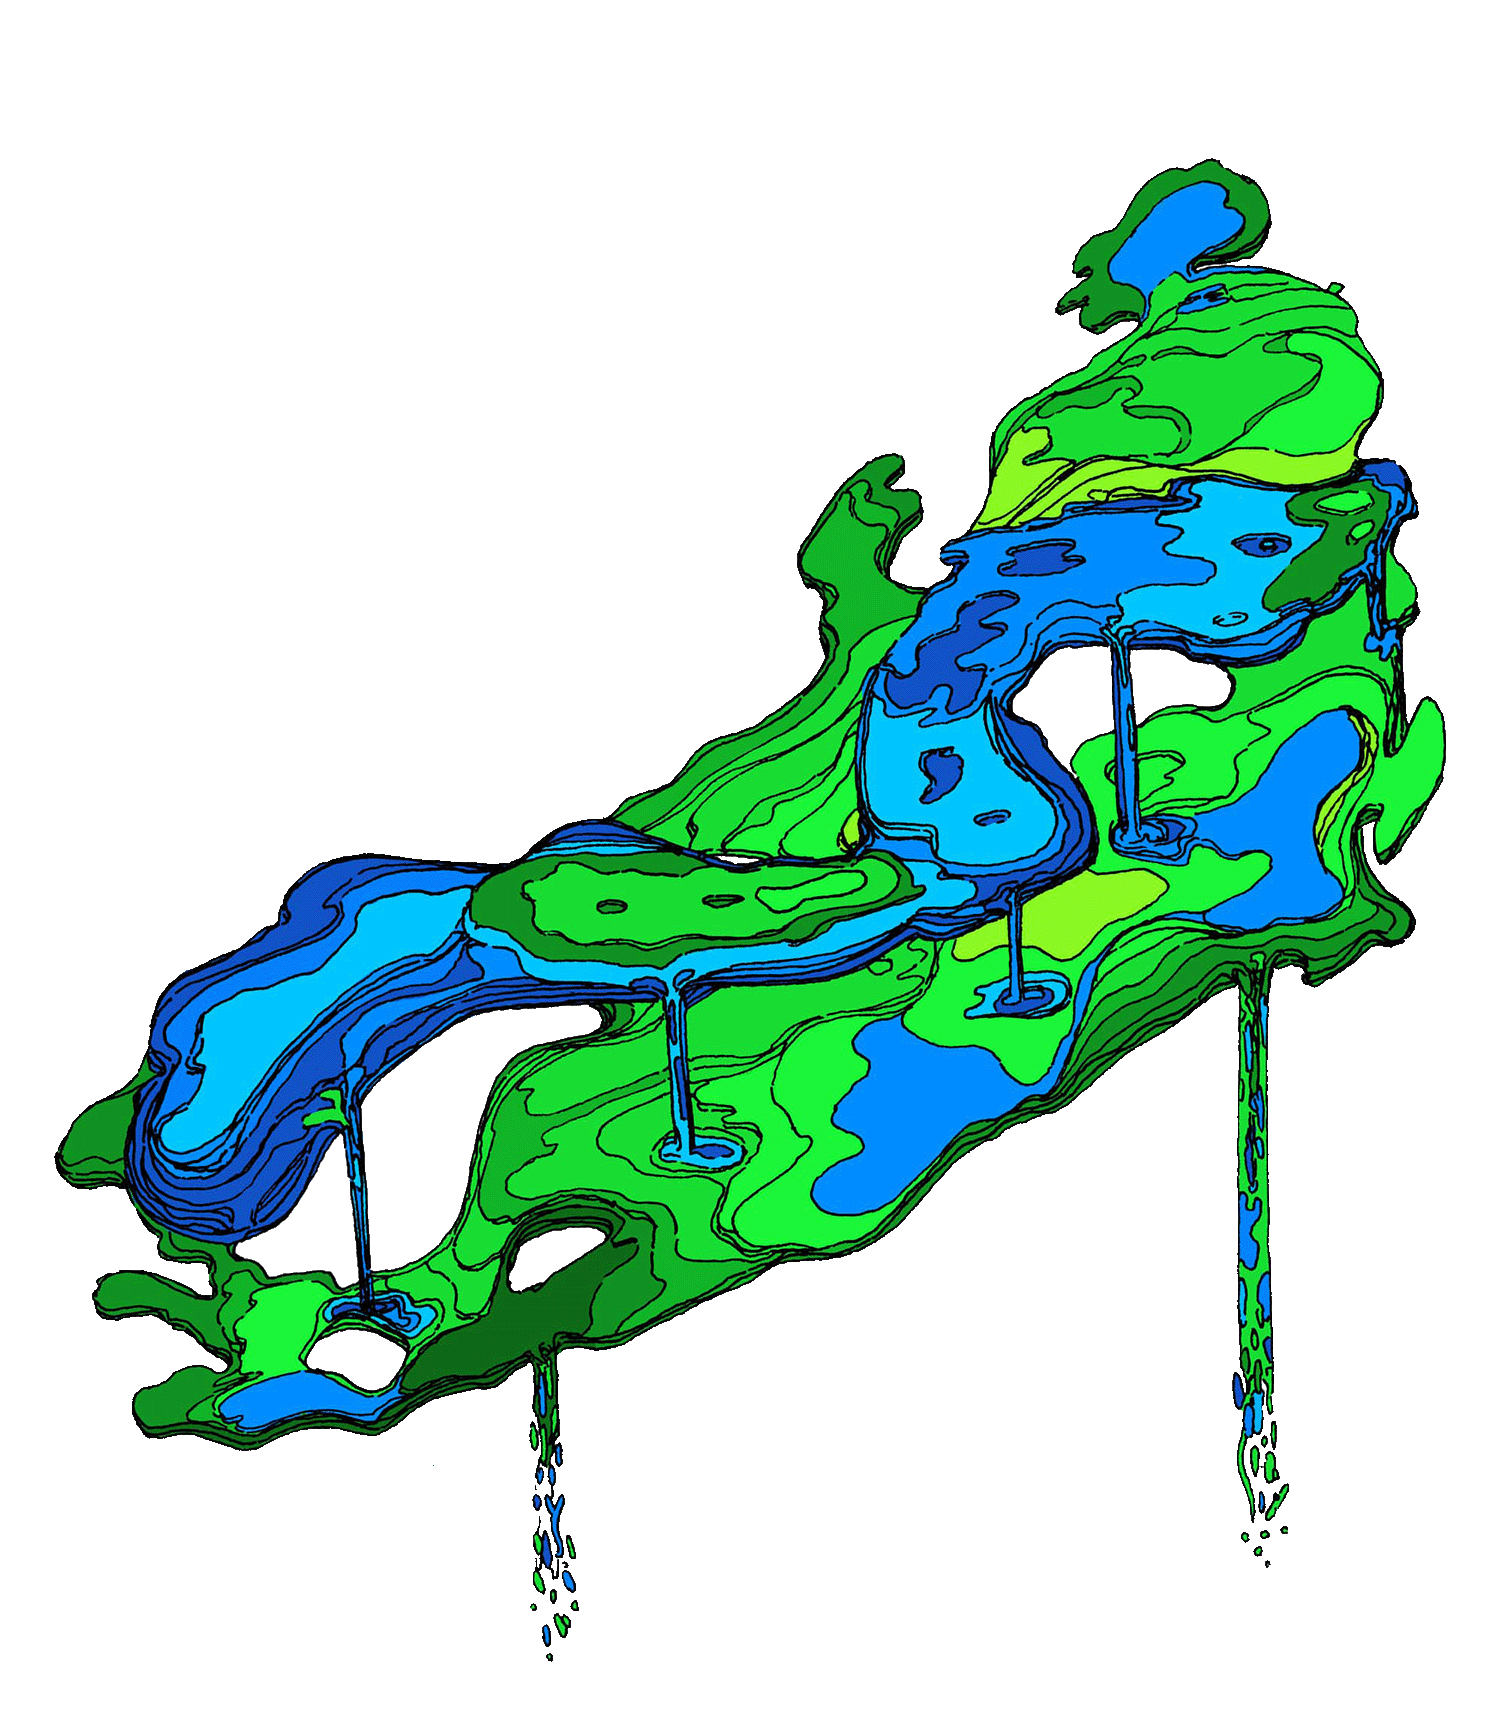 The Zones of Lakes B and C line art